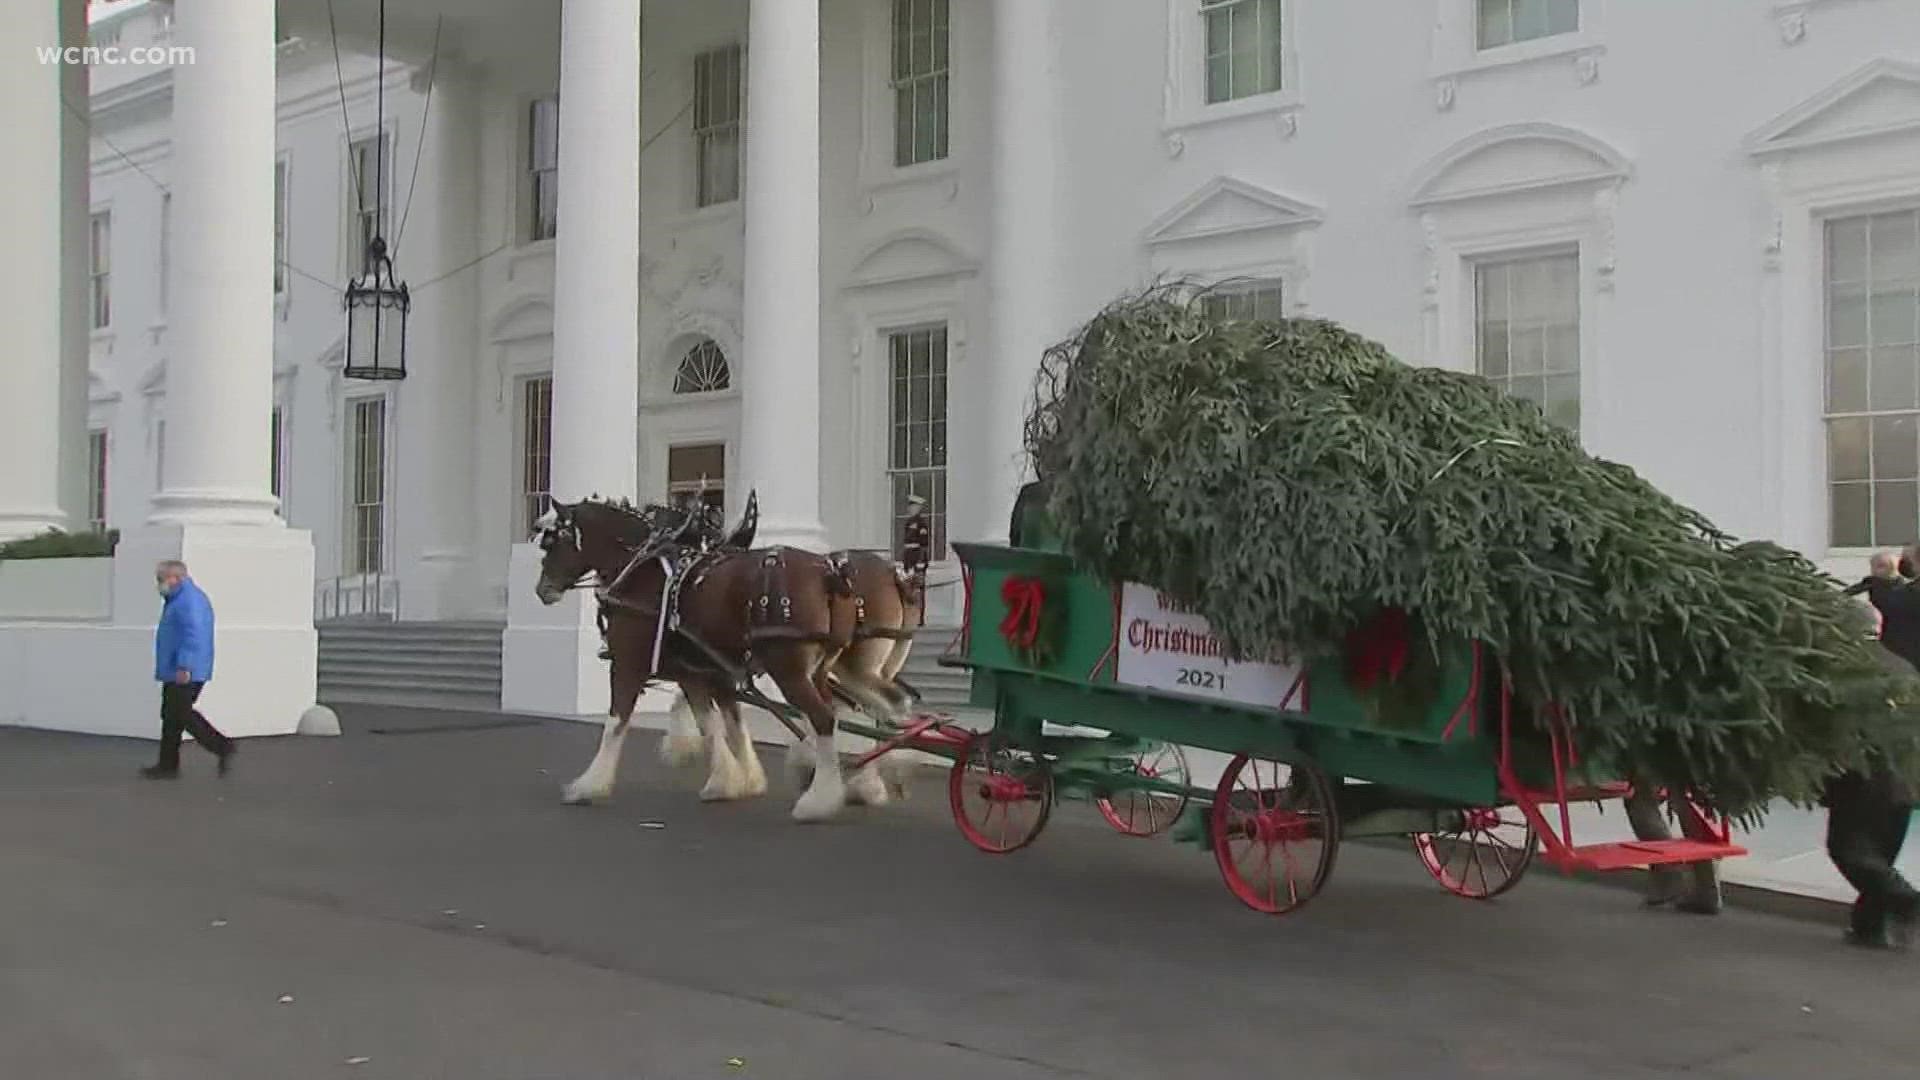 The White House Christmas tree, harvested from North Carolina's Ashe County arrived at the White House on Monday.